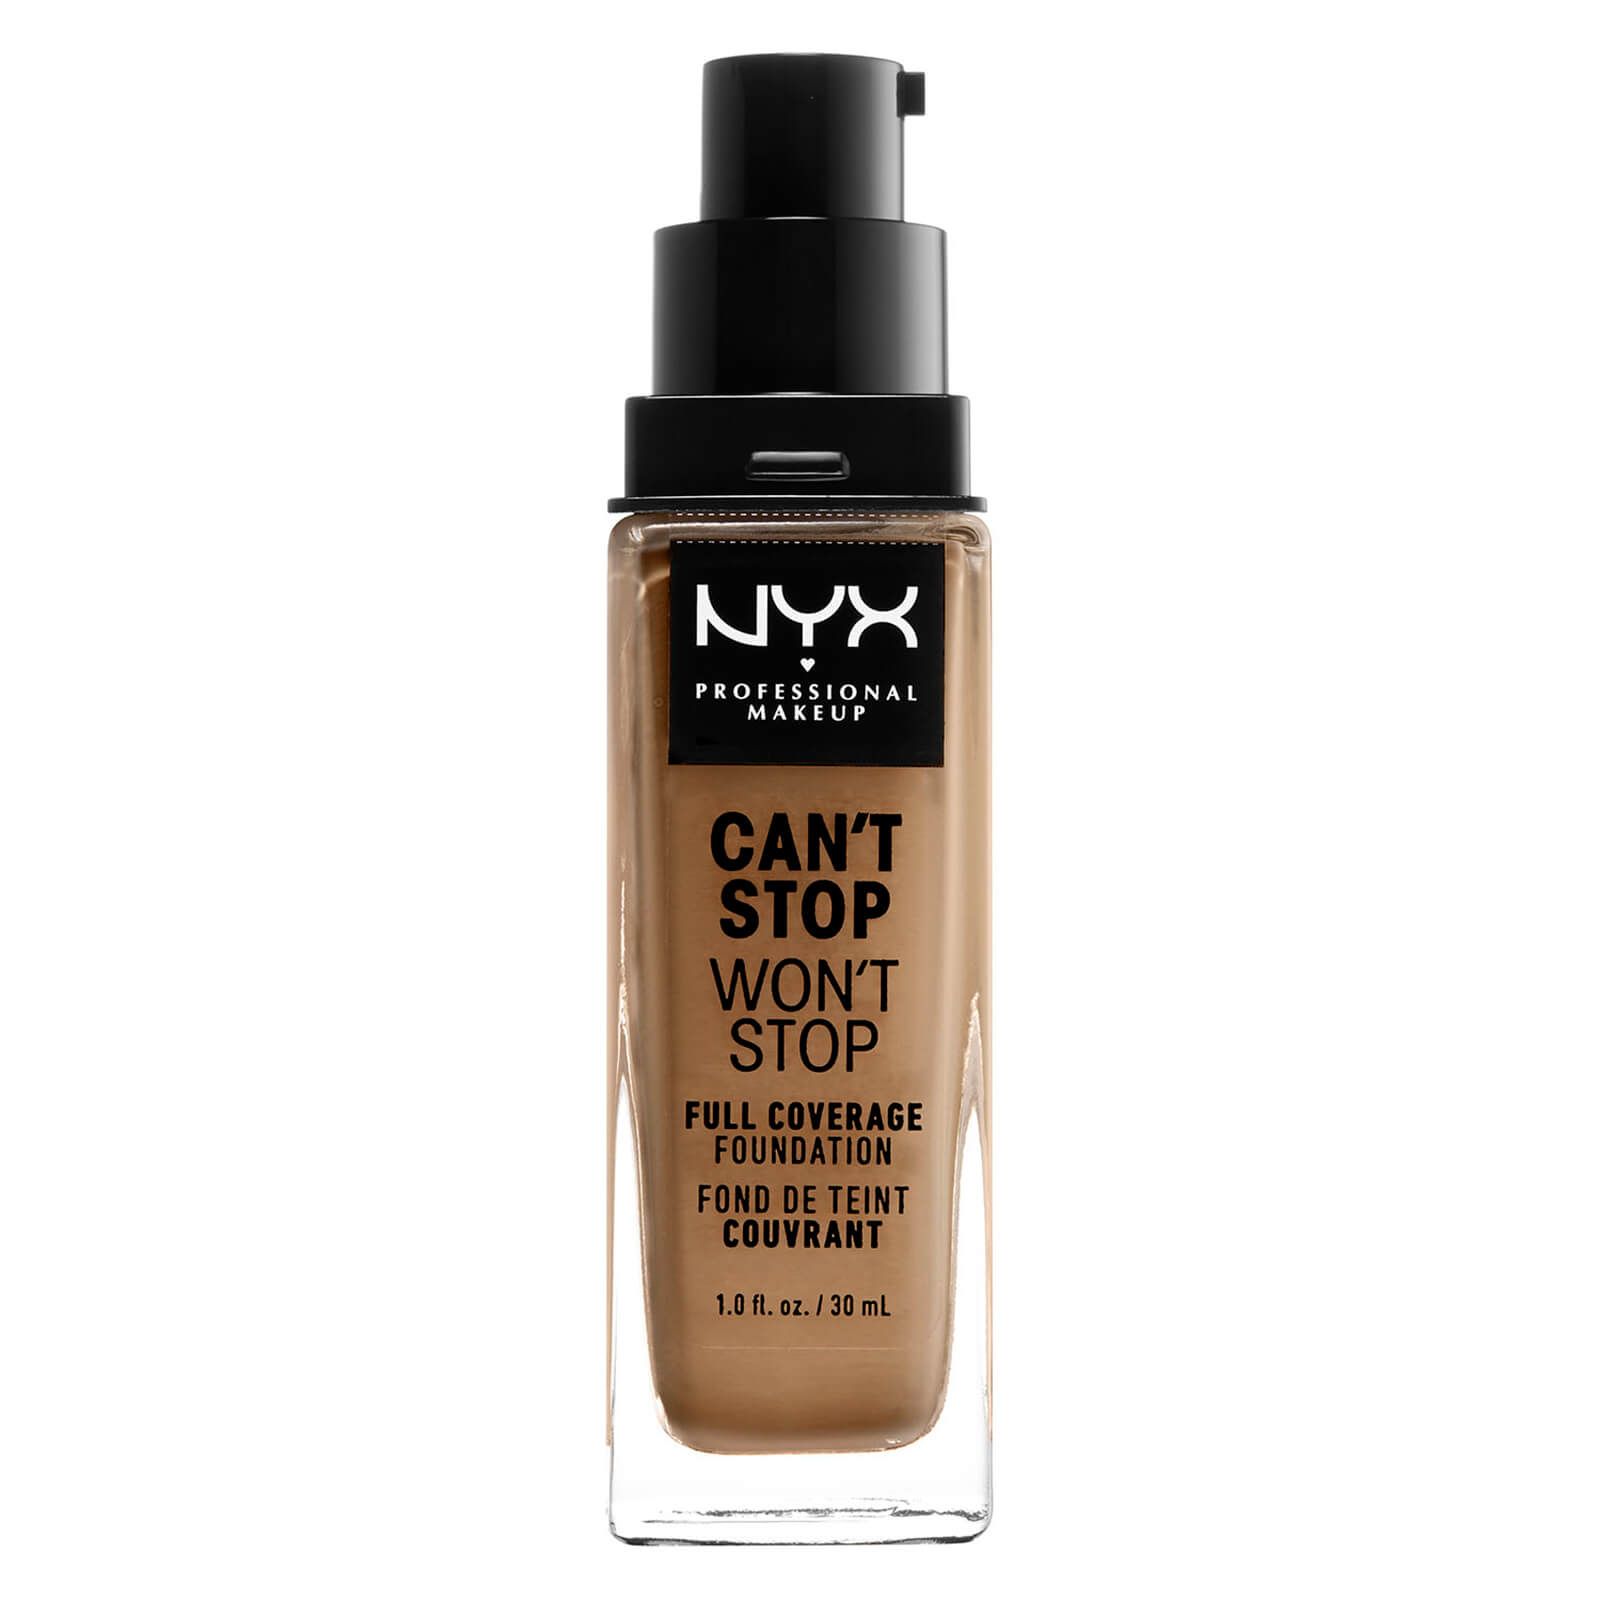 NYX Professional Makeup Can't Stop Won't Stop Full Coverage Liquid Foundation 30ml (Various Shades) - 15 Caramel - Olive Caramel Beige